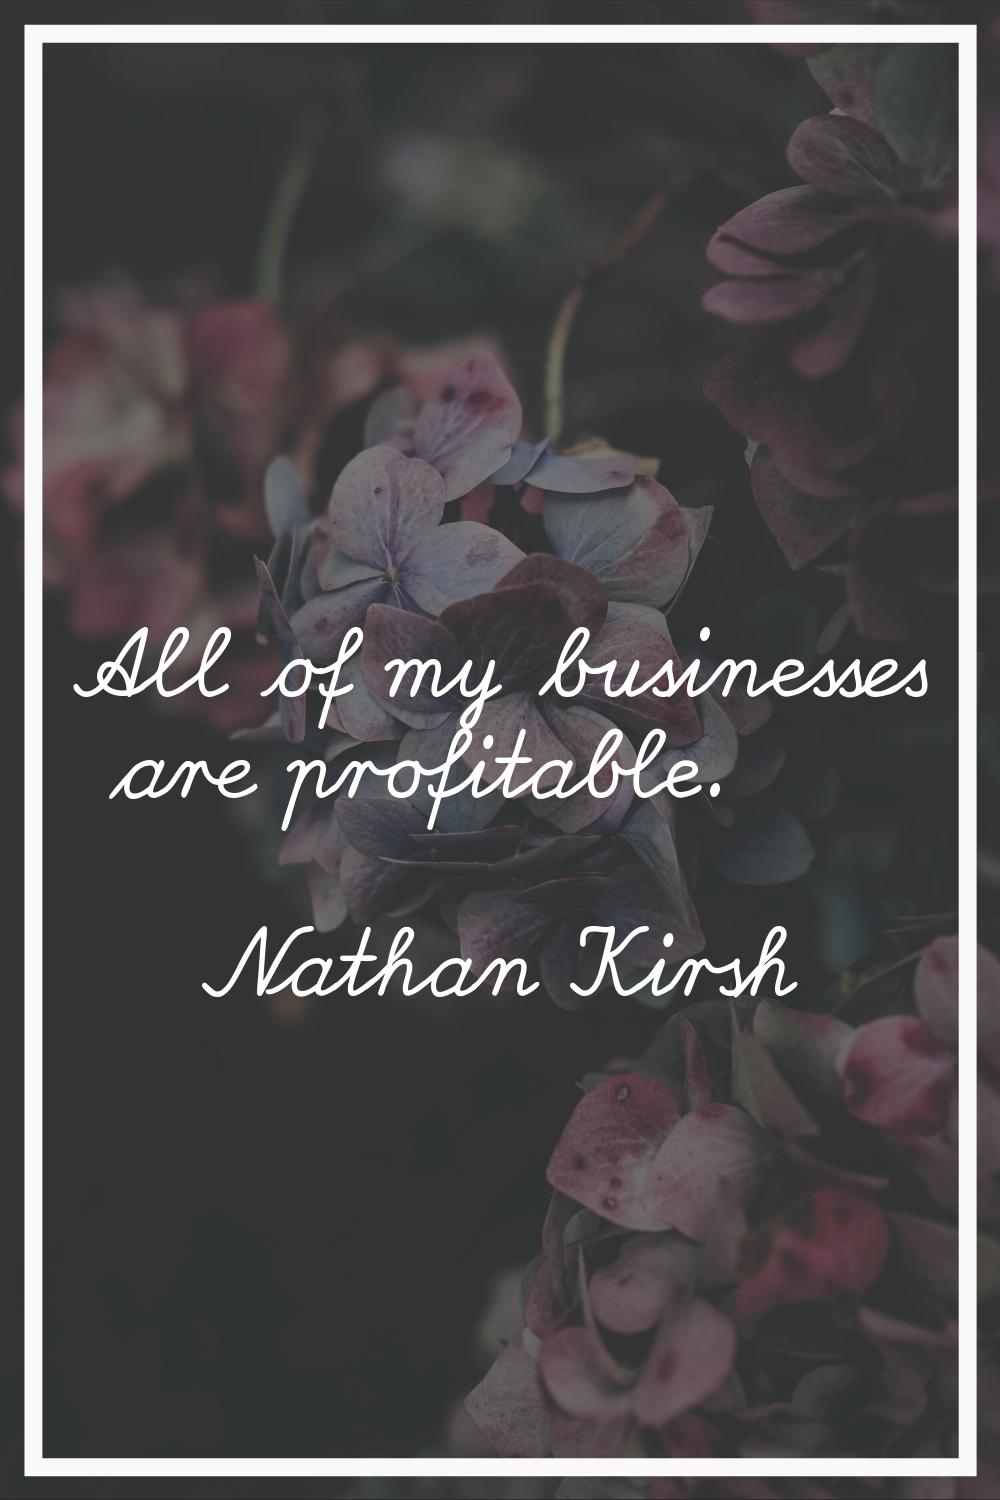 All of my businesses are profitable.